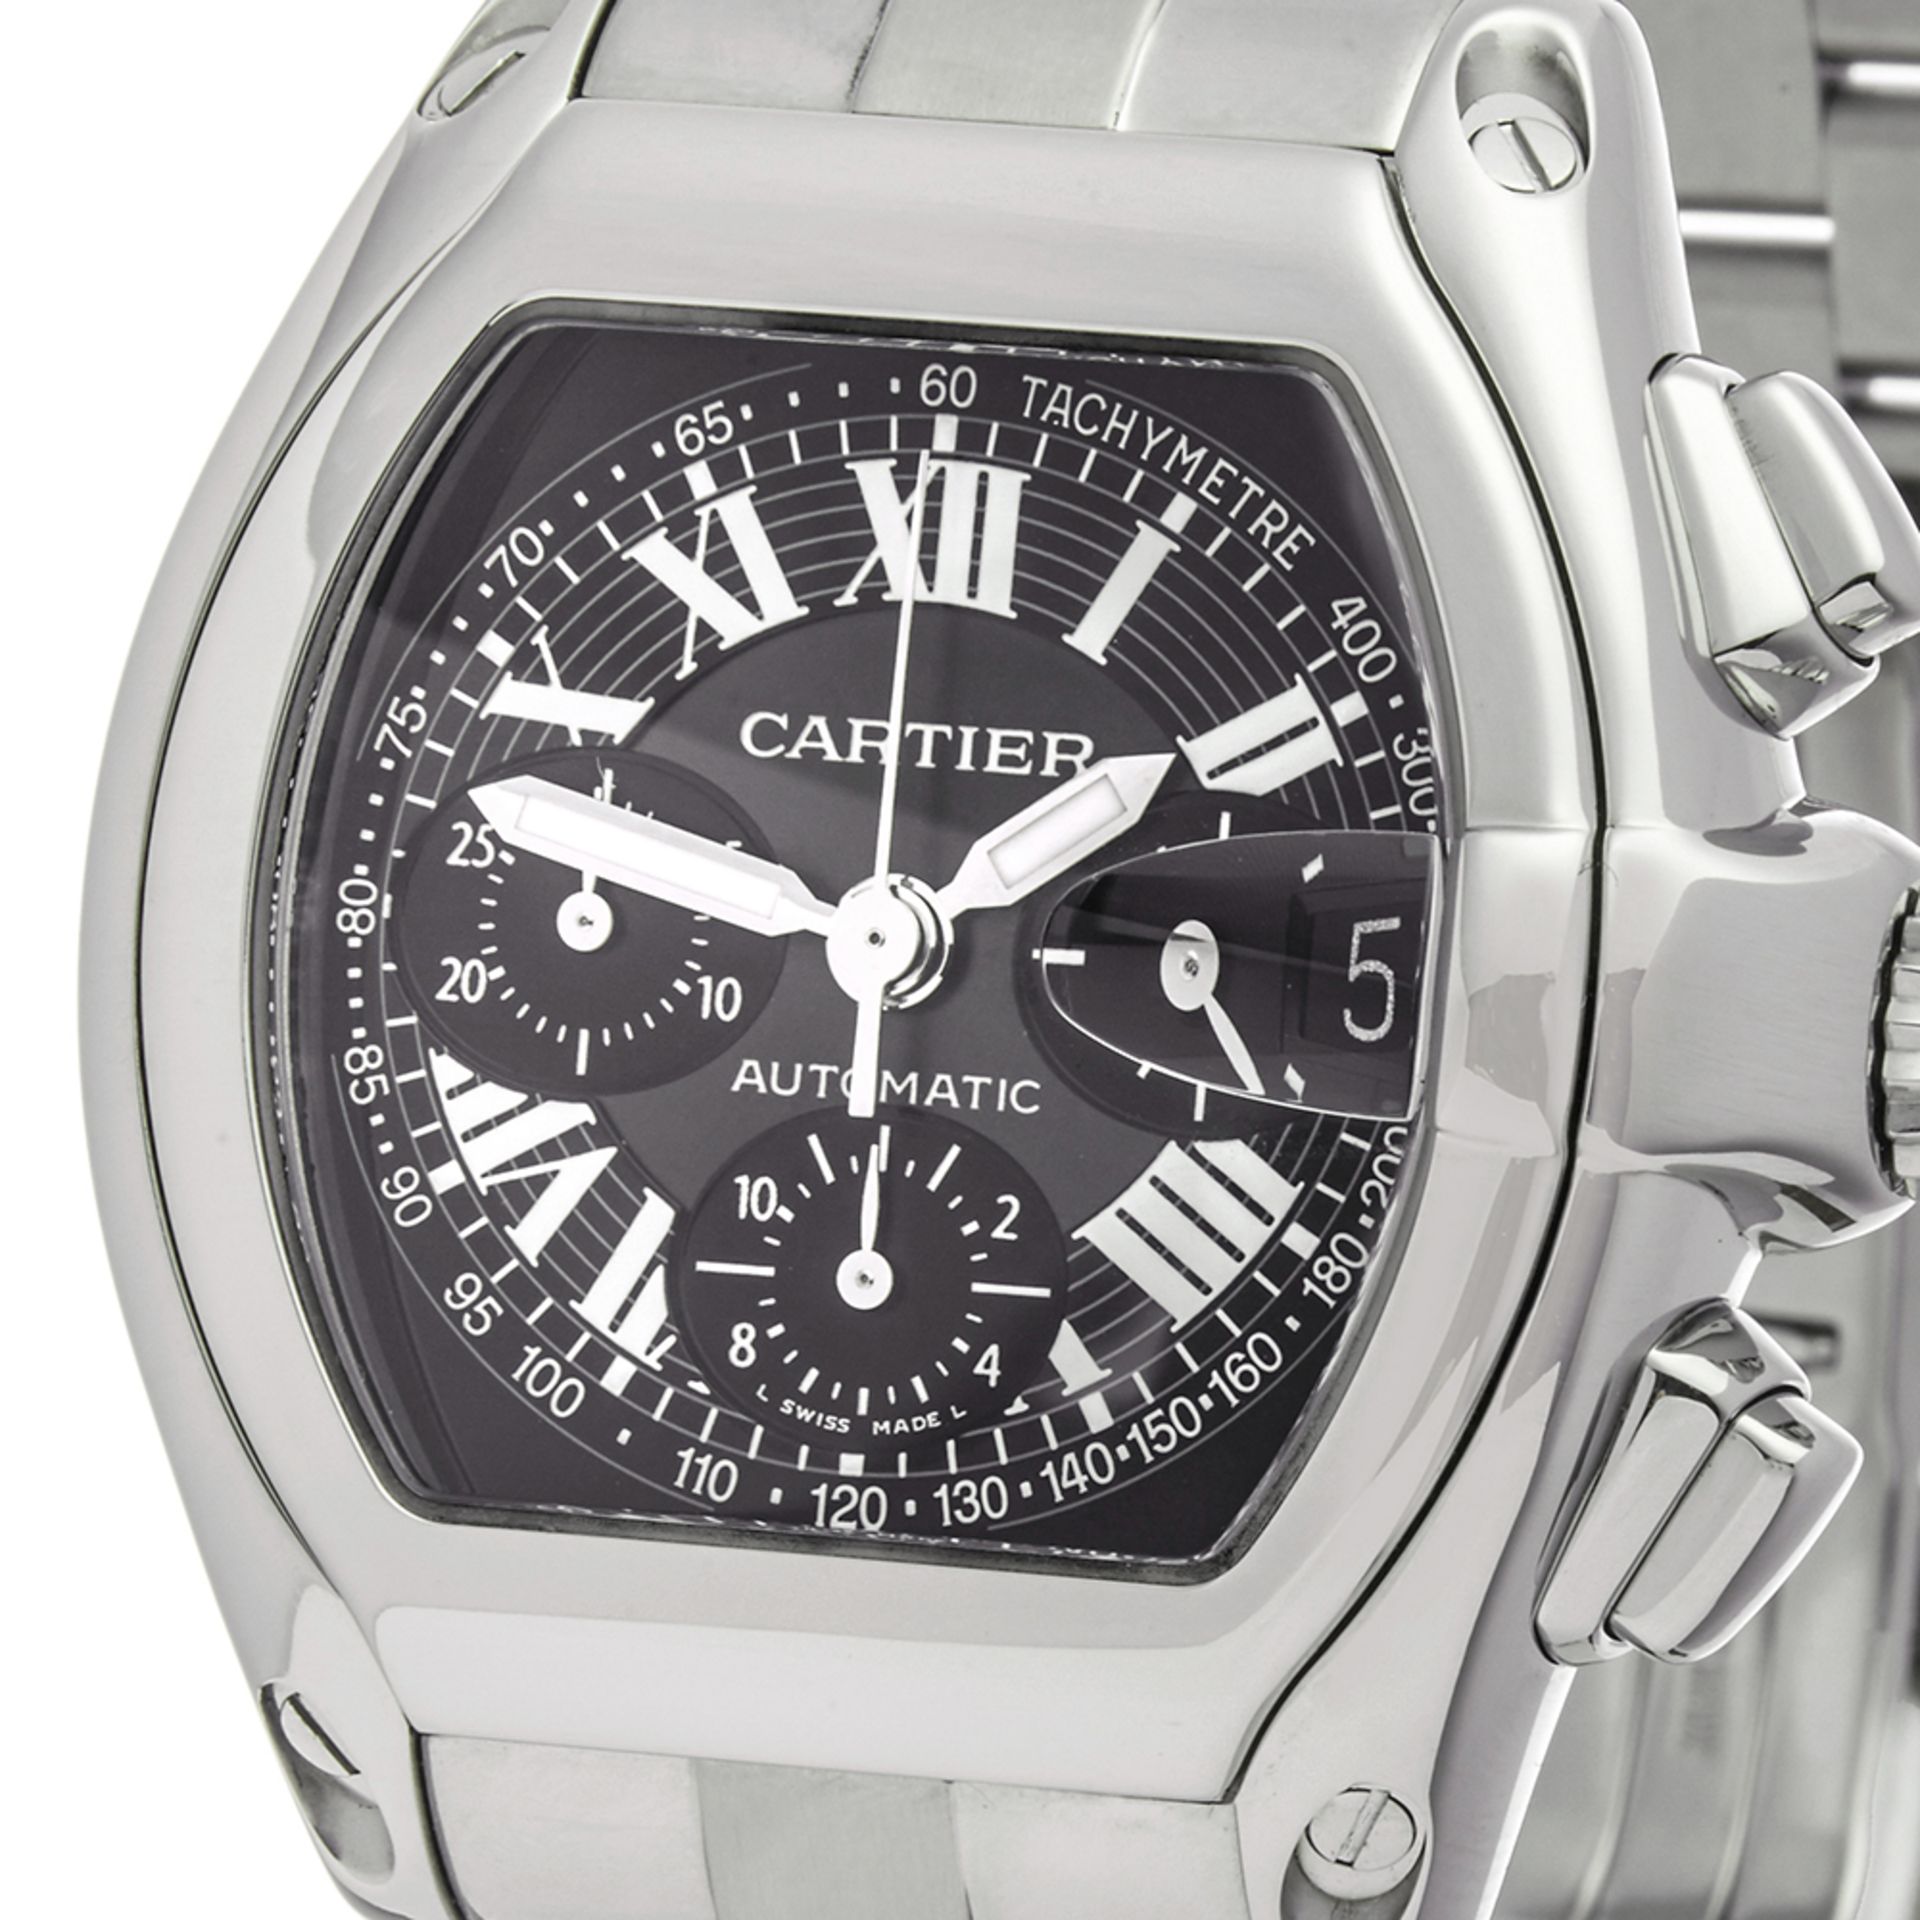 Cartier Roadster XL Chronograph Stainless Steel - 2618 or W62007X6